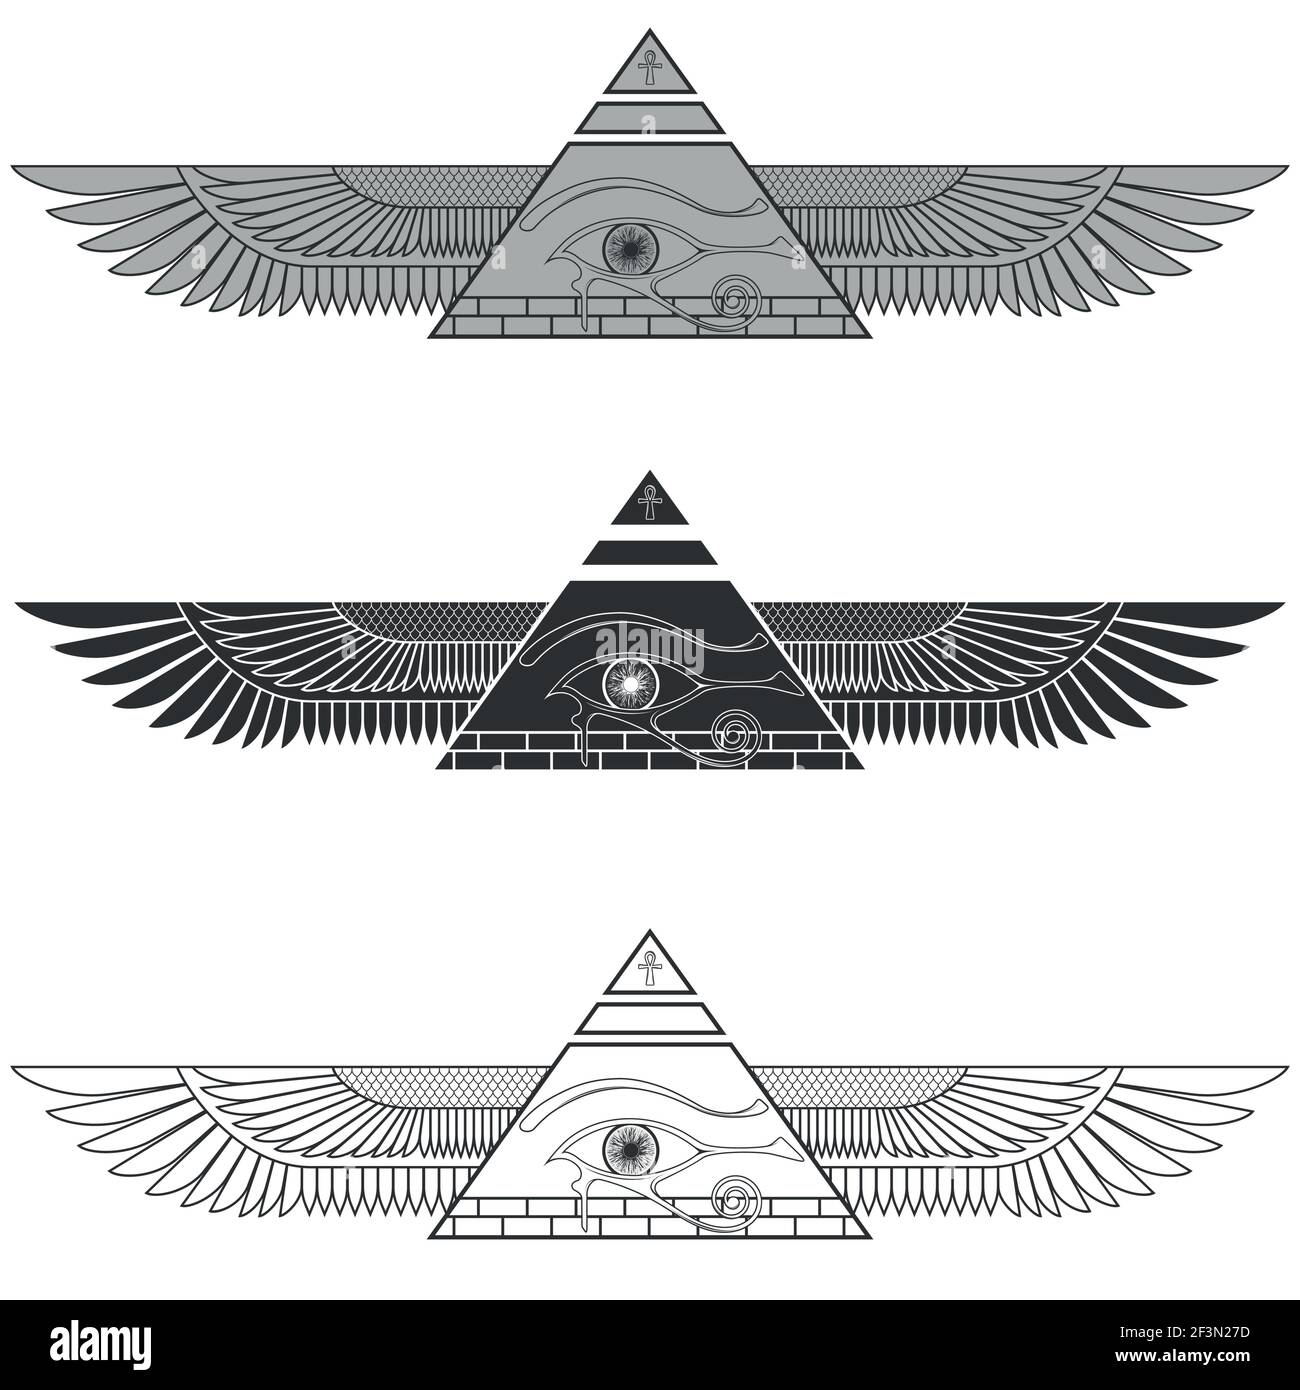 Silhouette Illustration Winged Pyramid With Eye Of Horus Ancient Egyptian Pyramid With Wings